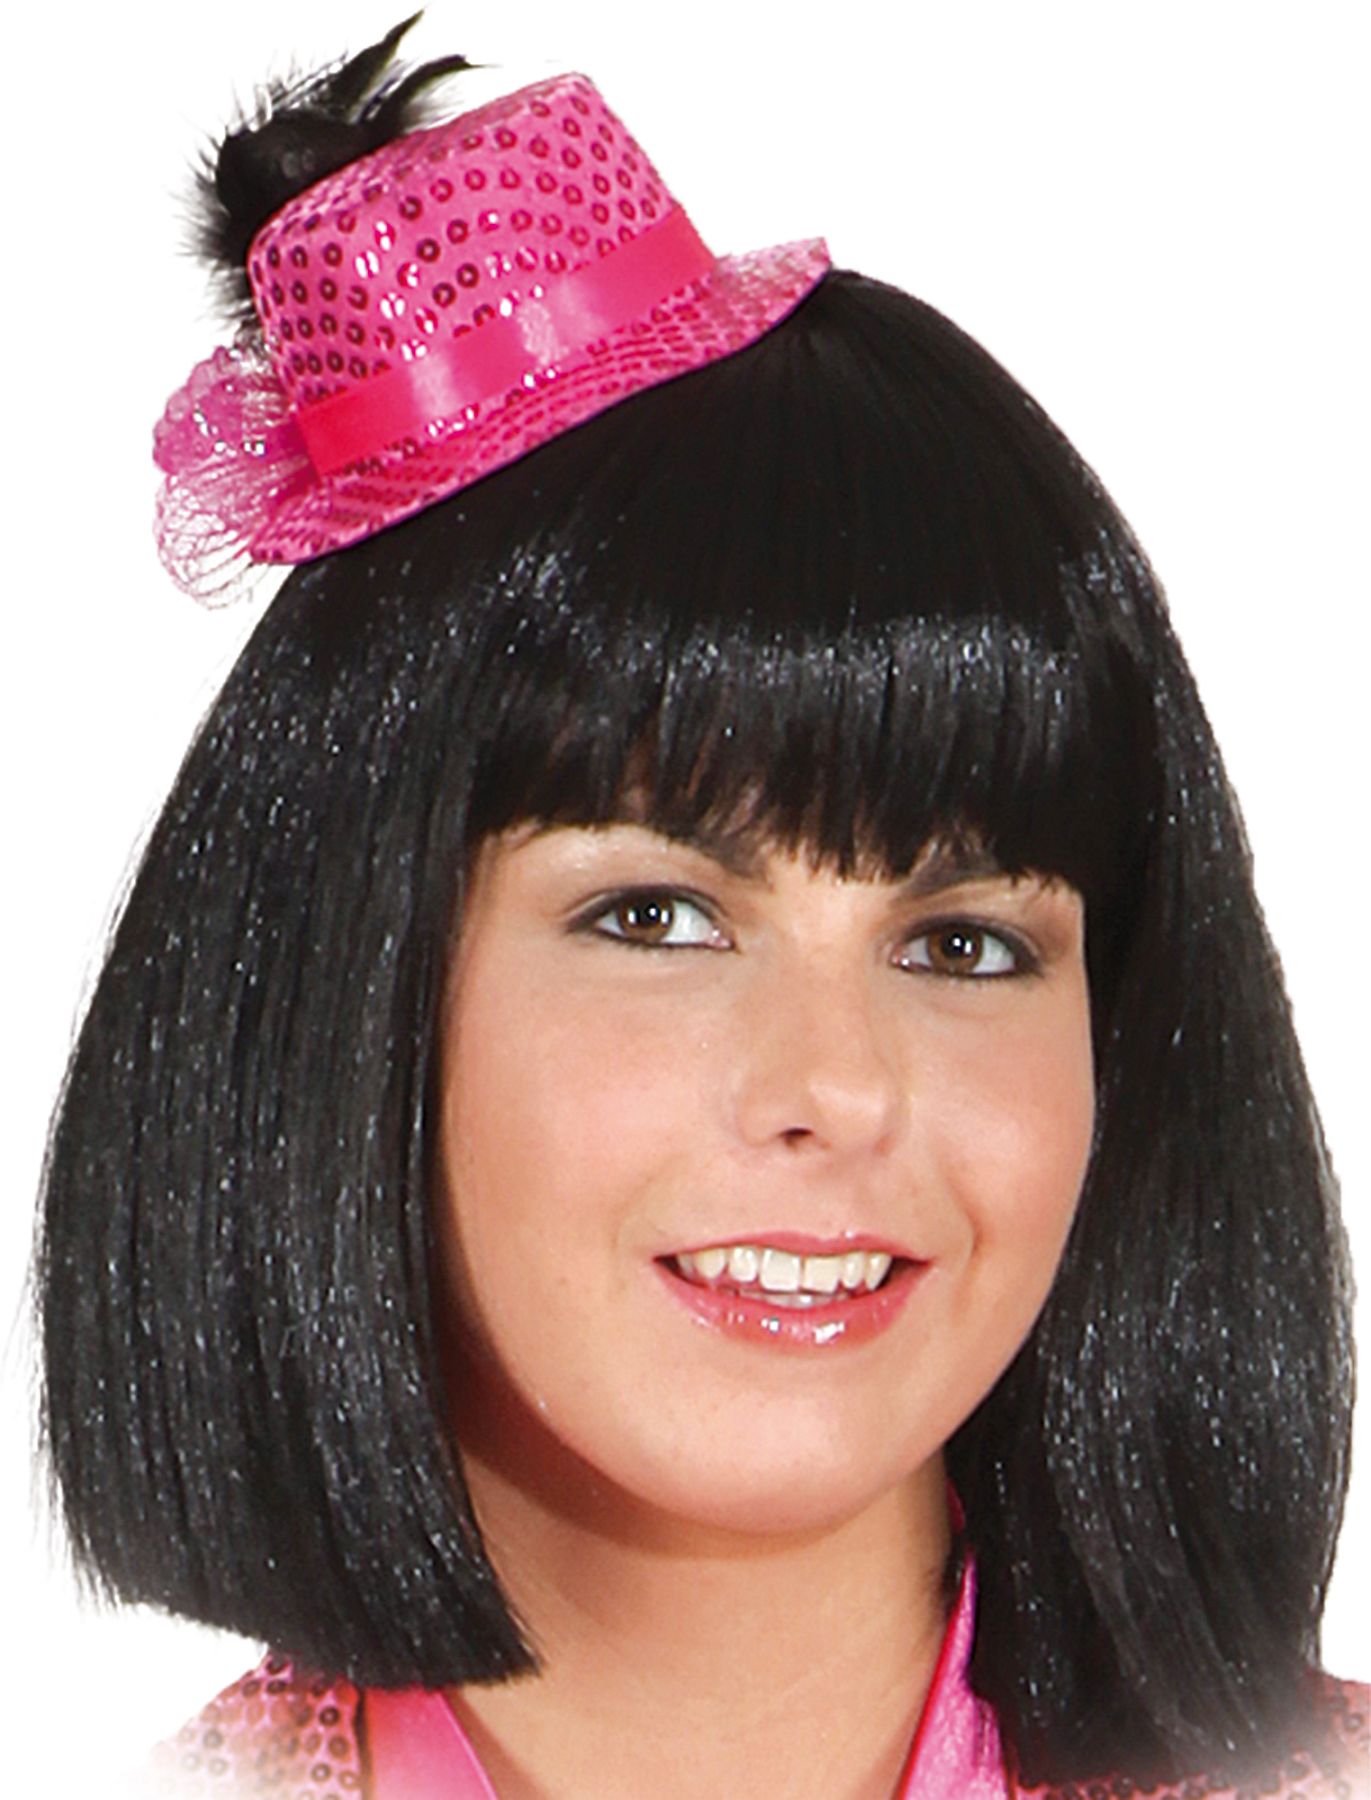 Mini sequined hat, pink